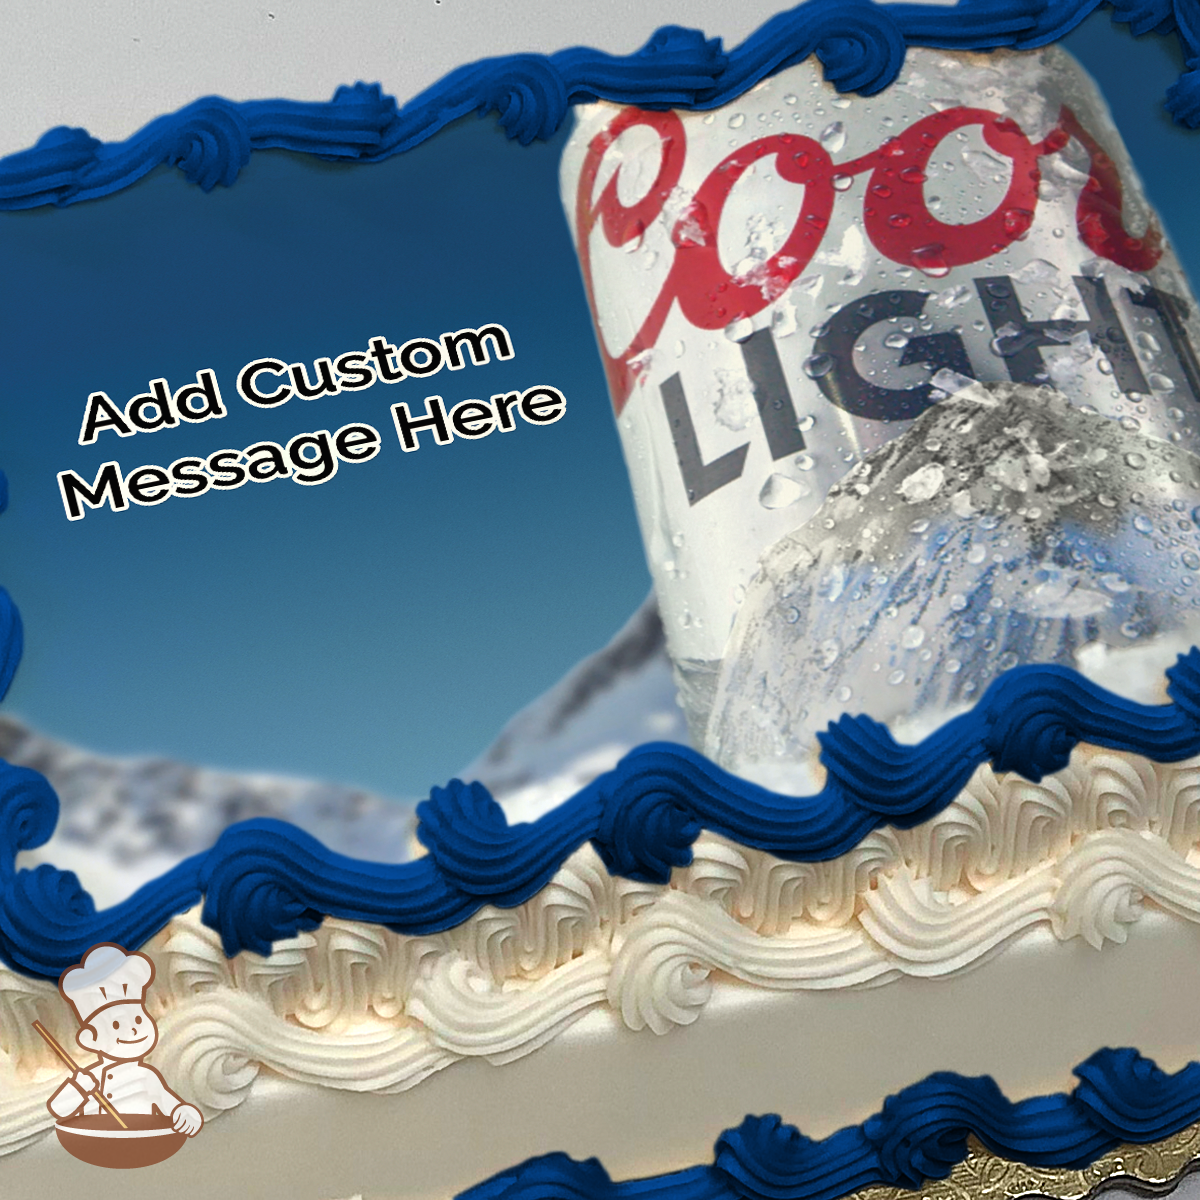 DIY Beer Can Cake │ Gift Idea for BF, Husband, Dad, Grandpa, Brother,  anyone! - YouTube